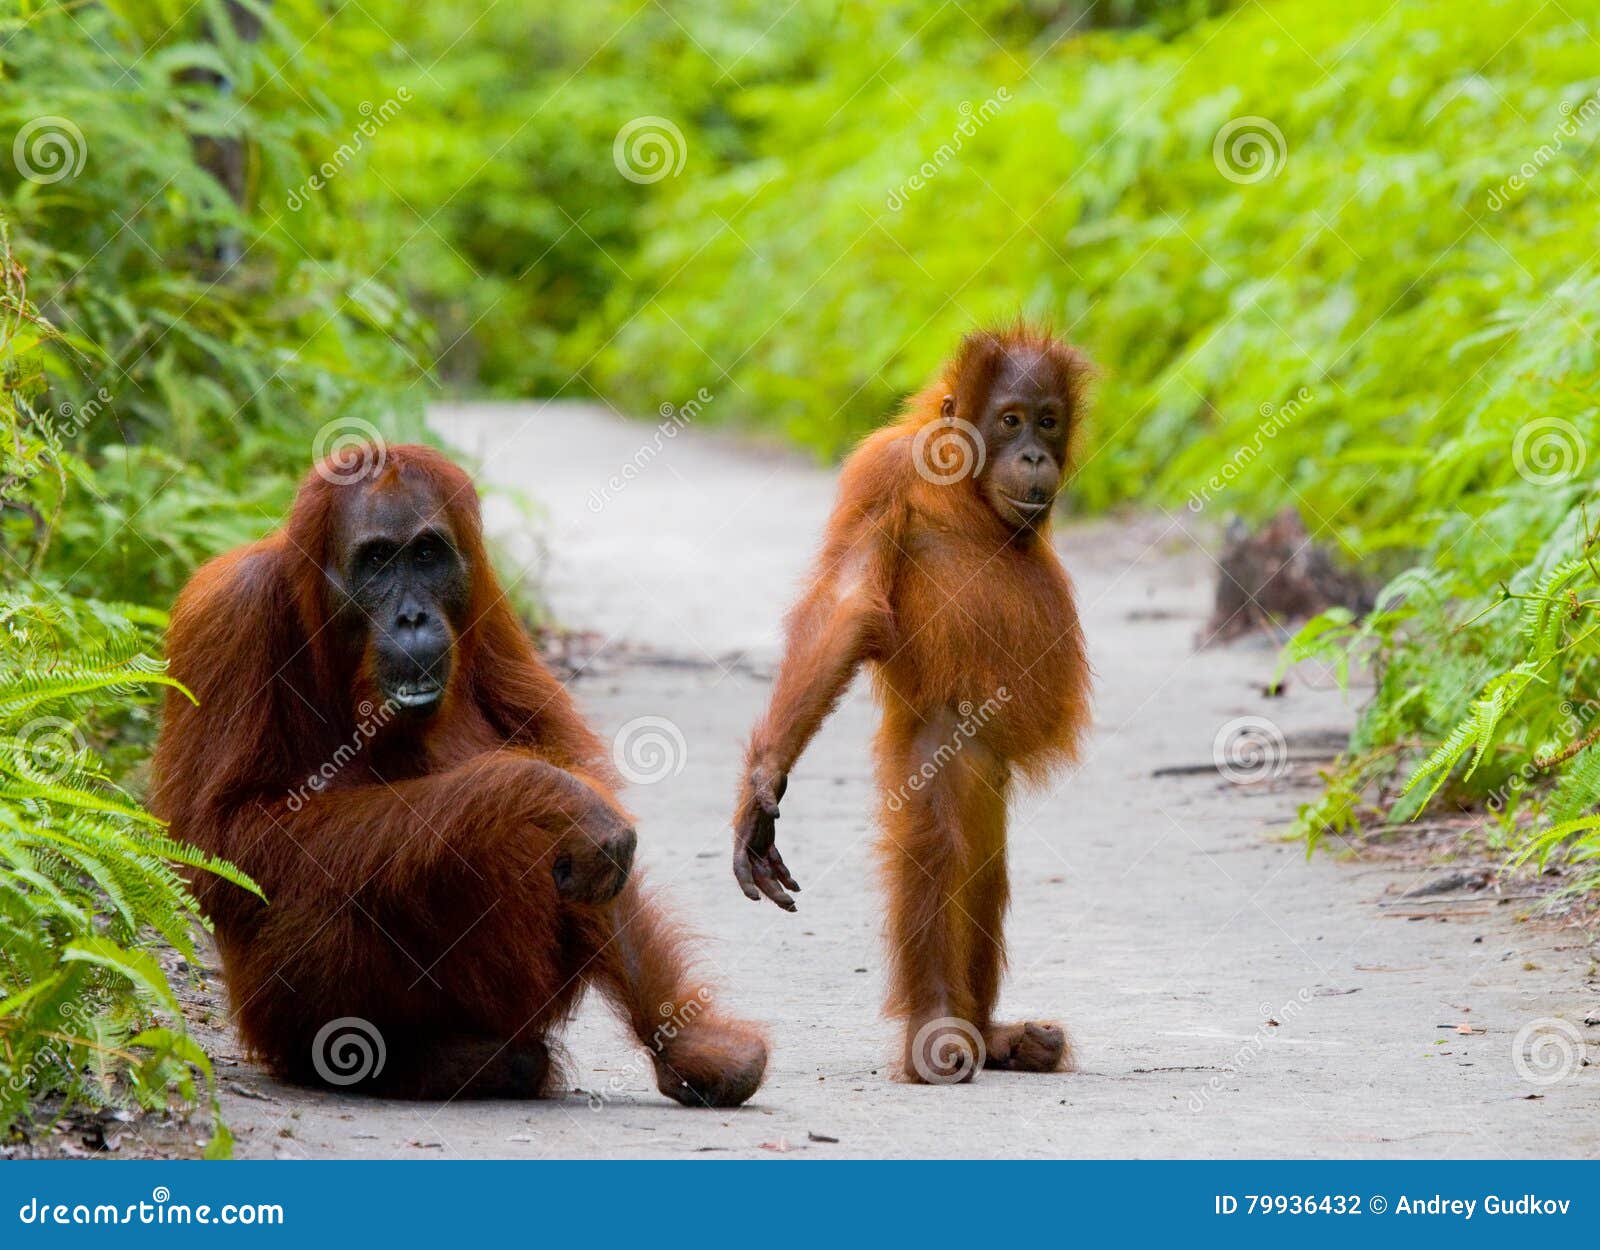 the female of the orangutan with a baby on a footpath. funny pose. indonesia.